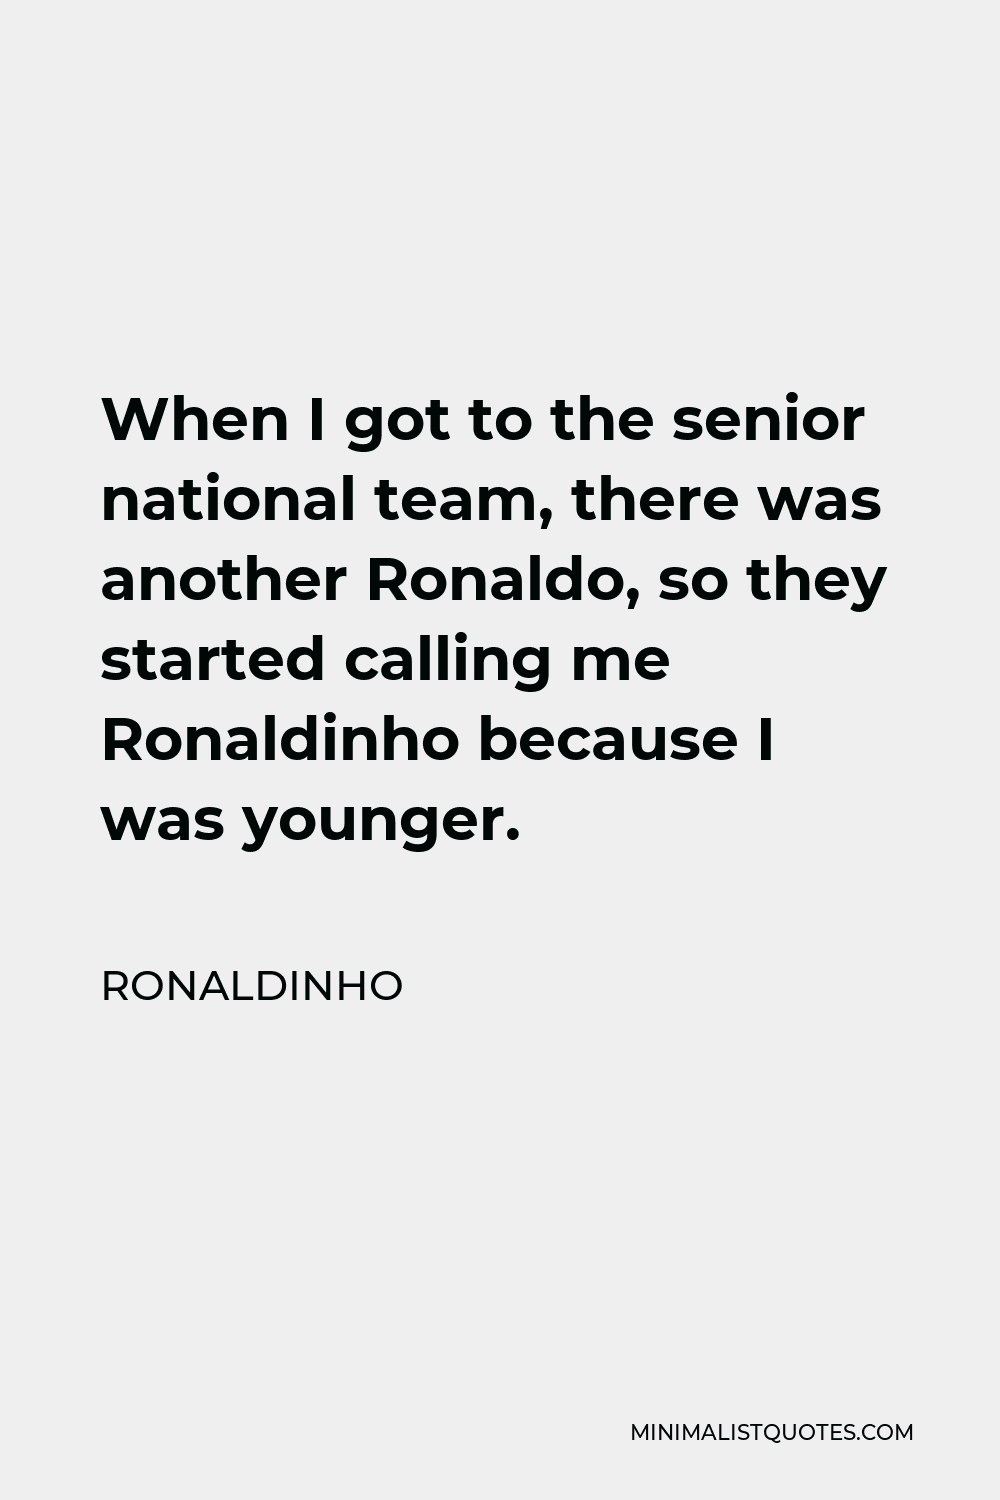 Ronaldinho Quote - When I got to the senior national team, there was another Ronaldo, so they started calling me Ronaldinho because I was younger.